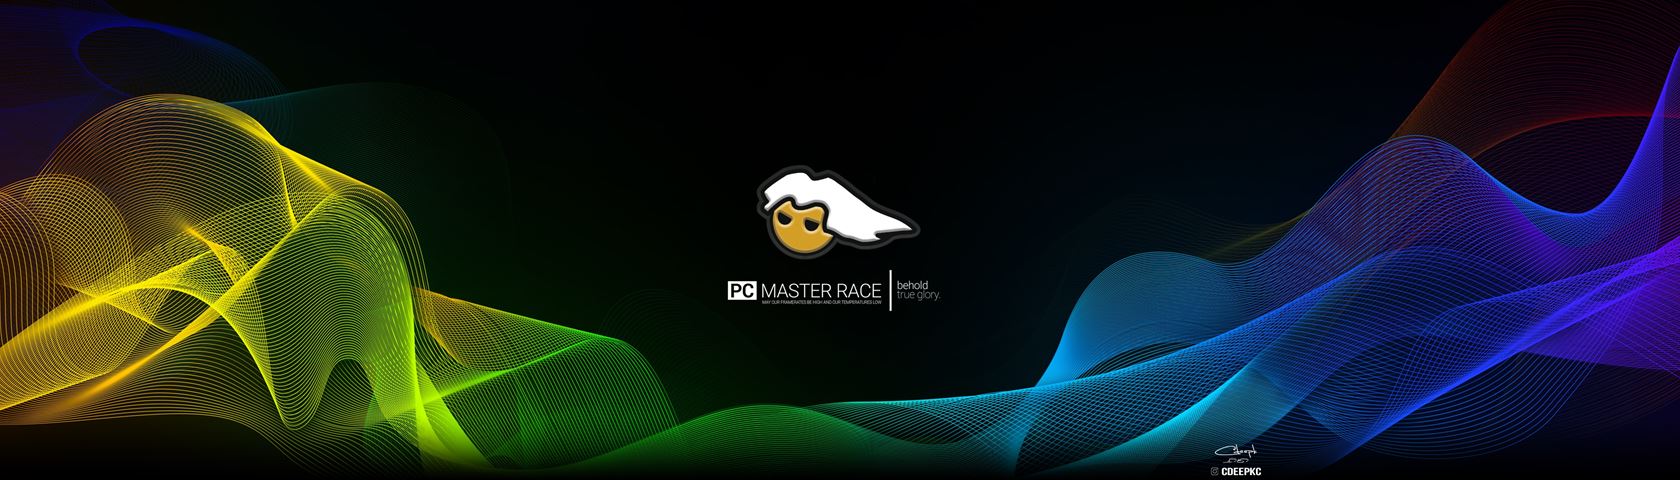 Project Pc Master Race Valerie Images Wallpaperfusion